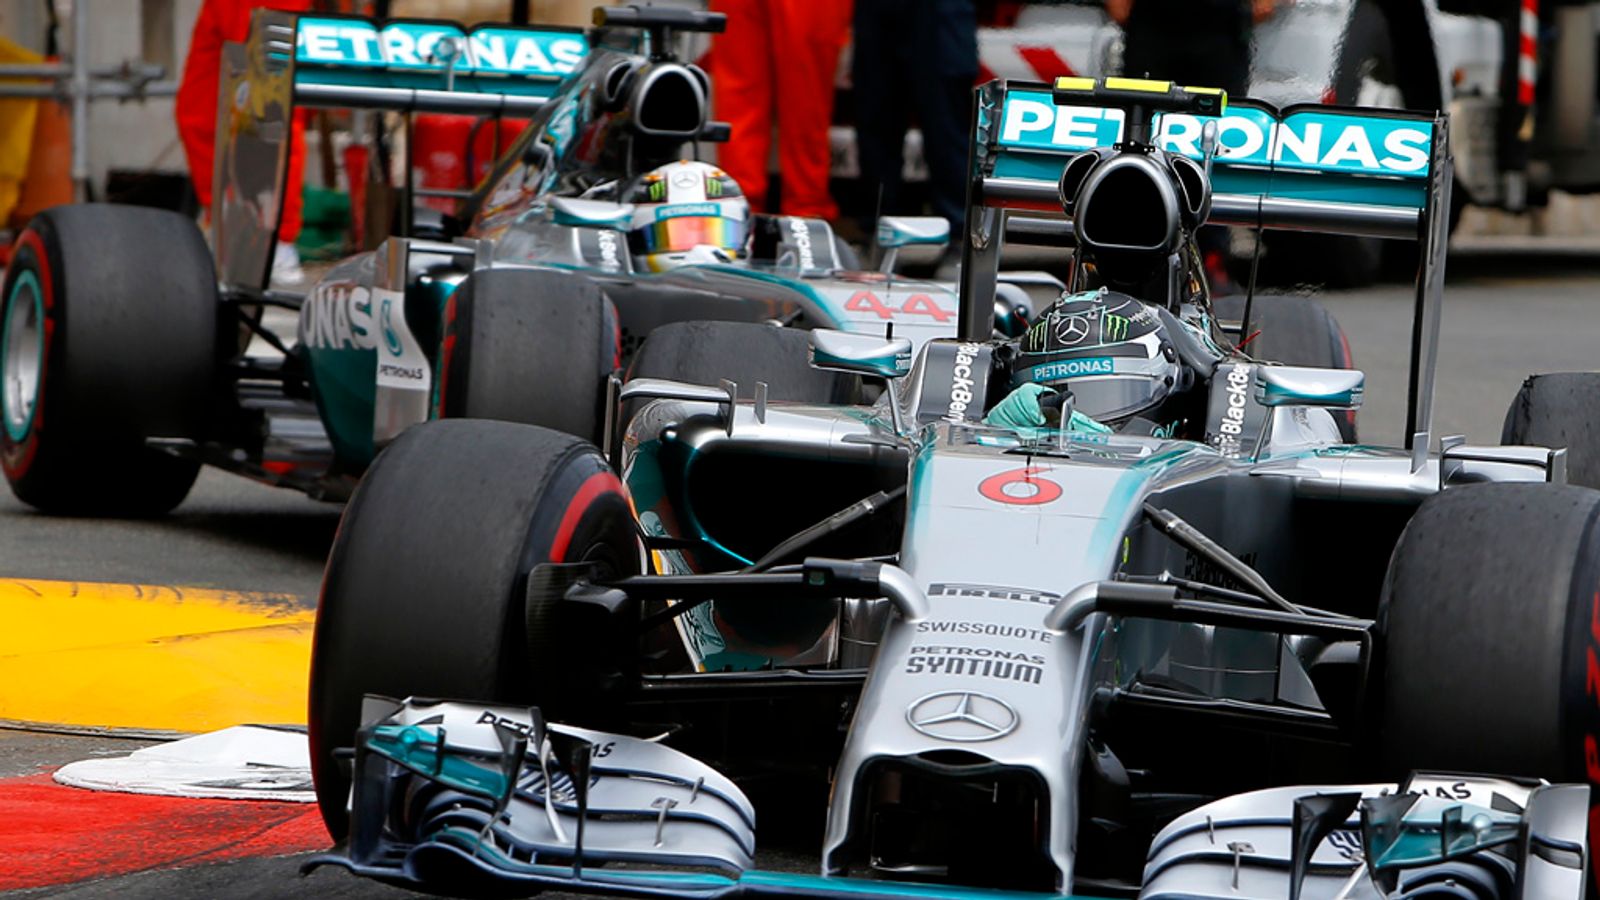 2014 Monaco GP analysis: Delving into the detail and strategies